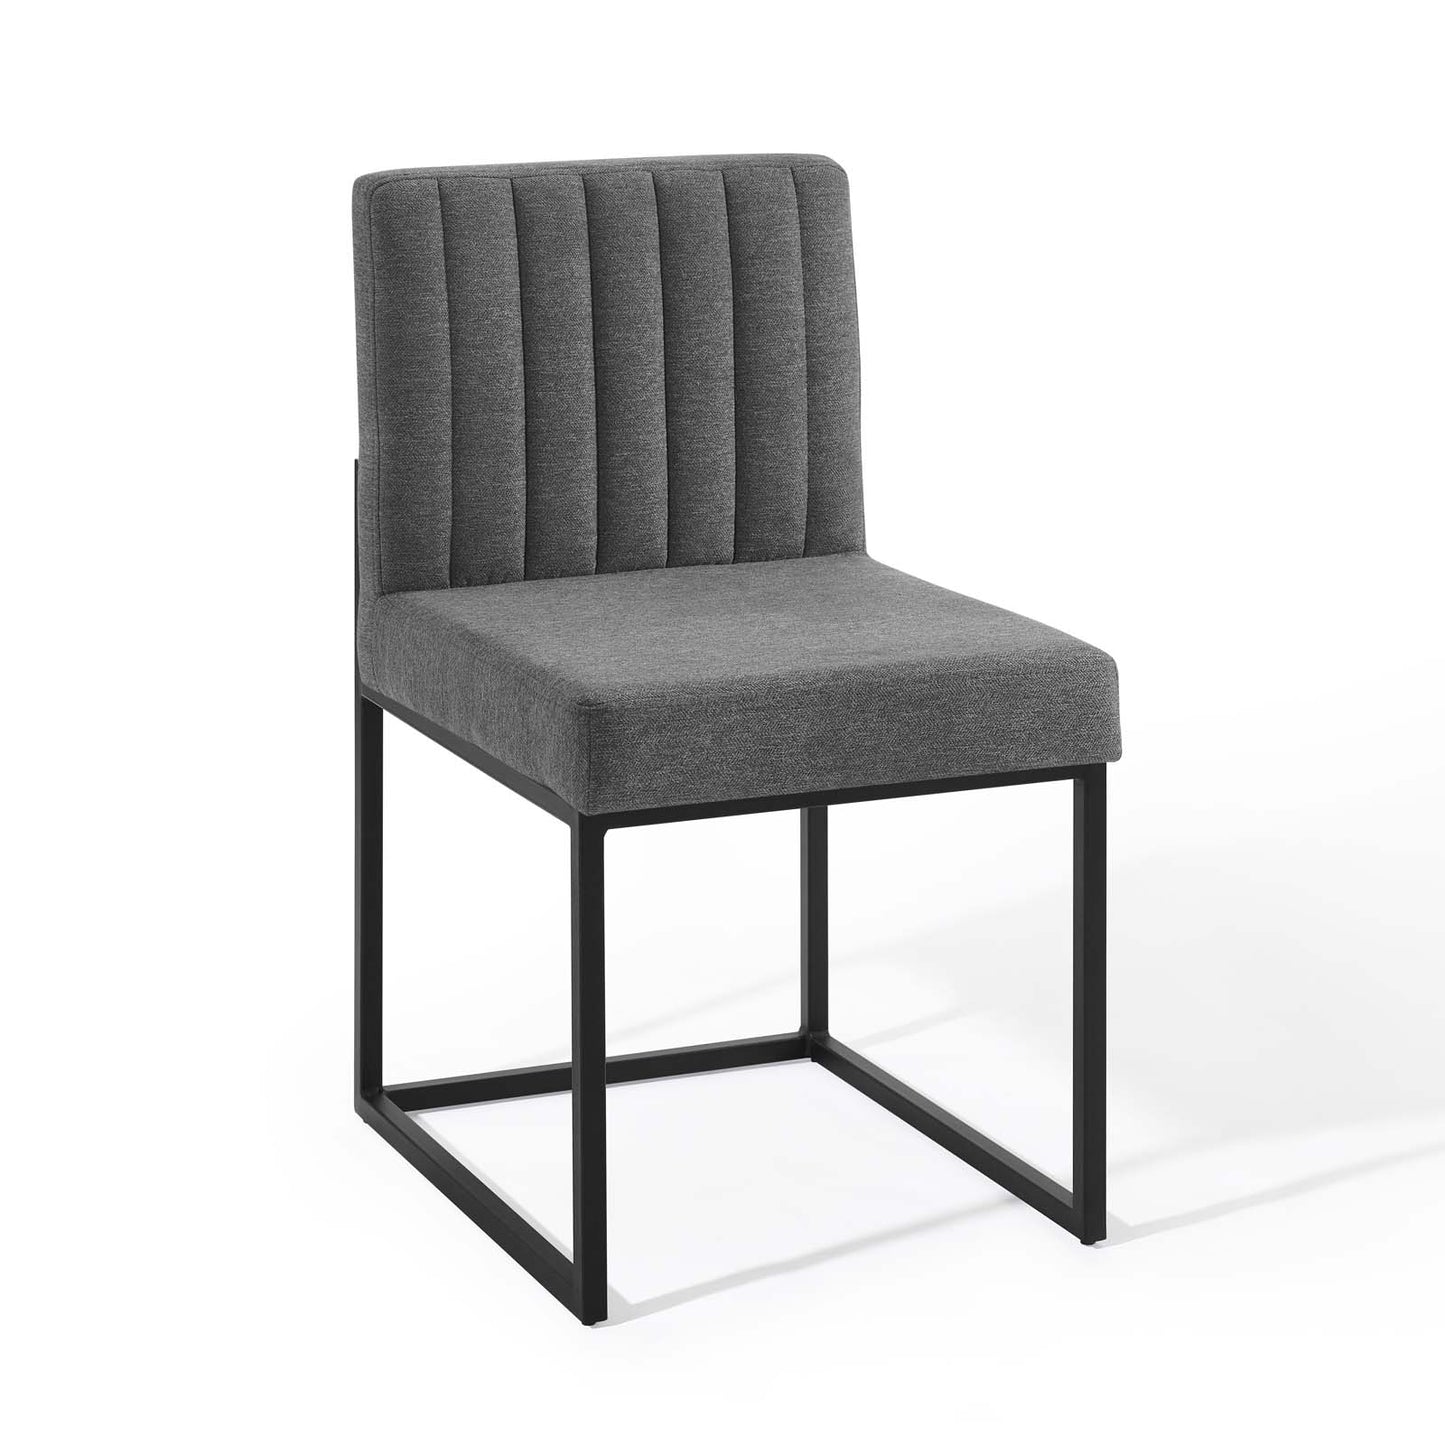 Carriage Channel Tufted Sled Base Upholstered Fabric Dining Chair Black Charcoal EEI-3807-BLK-CHA